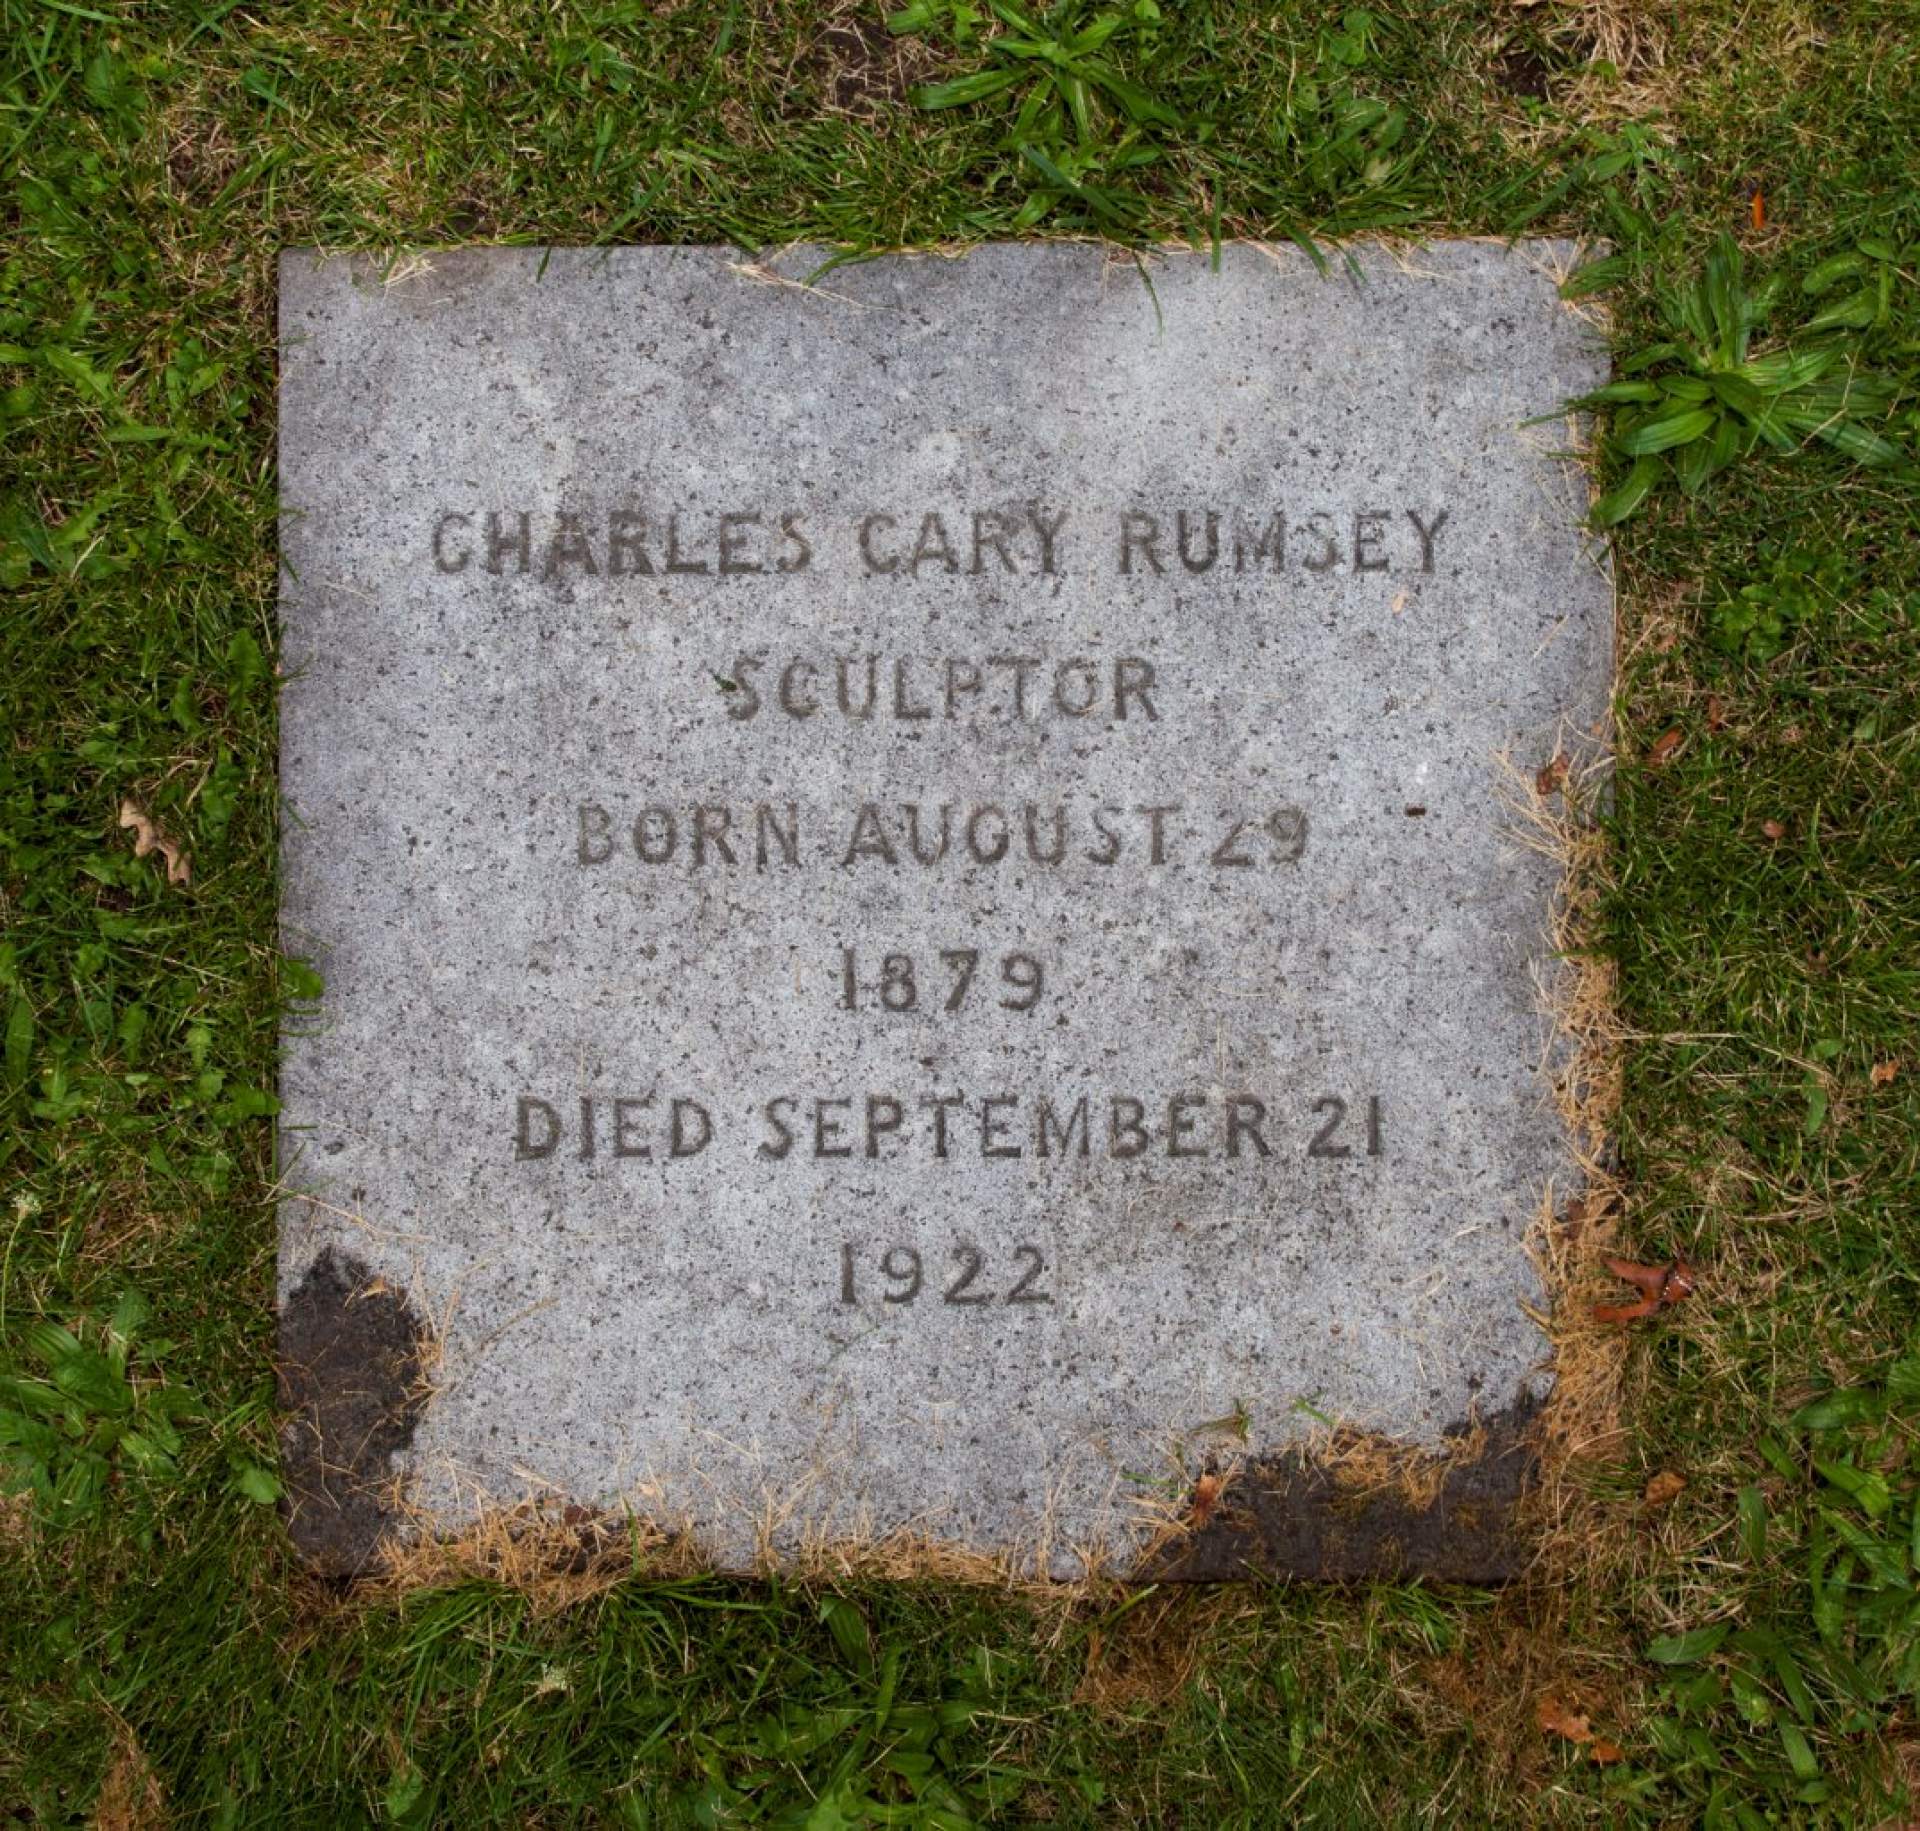 Charles Cary Rumsey died on this day in 1922